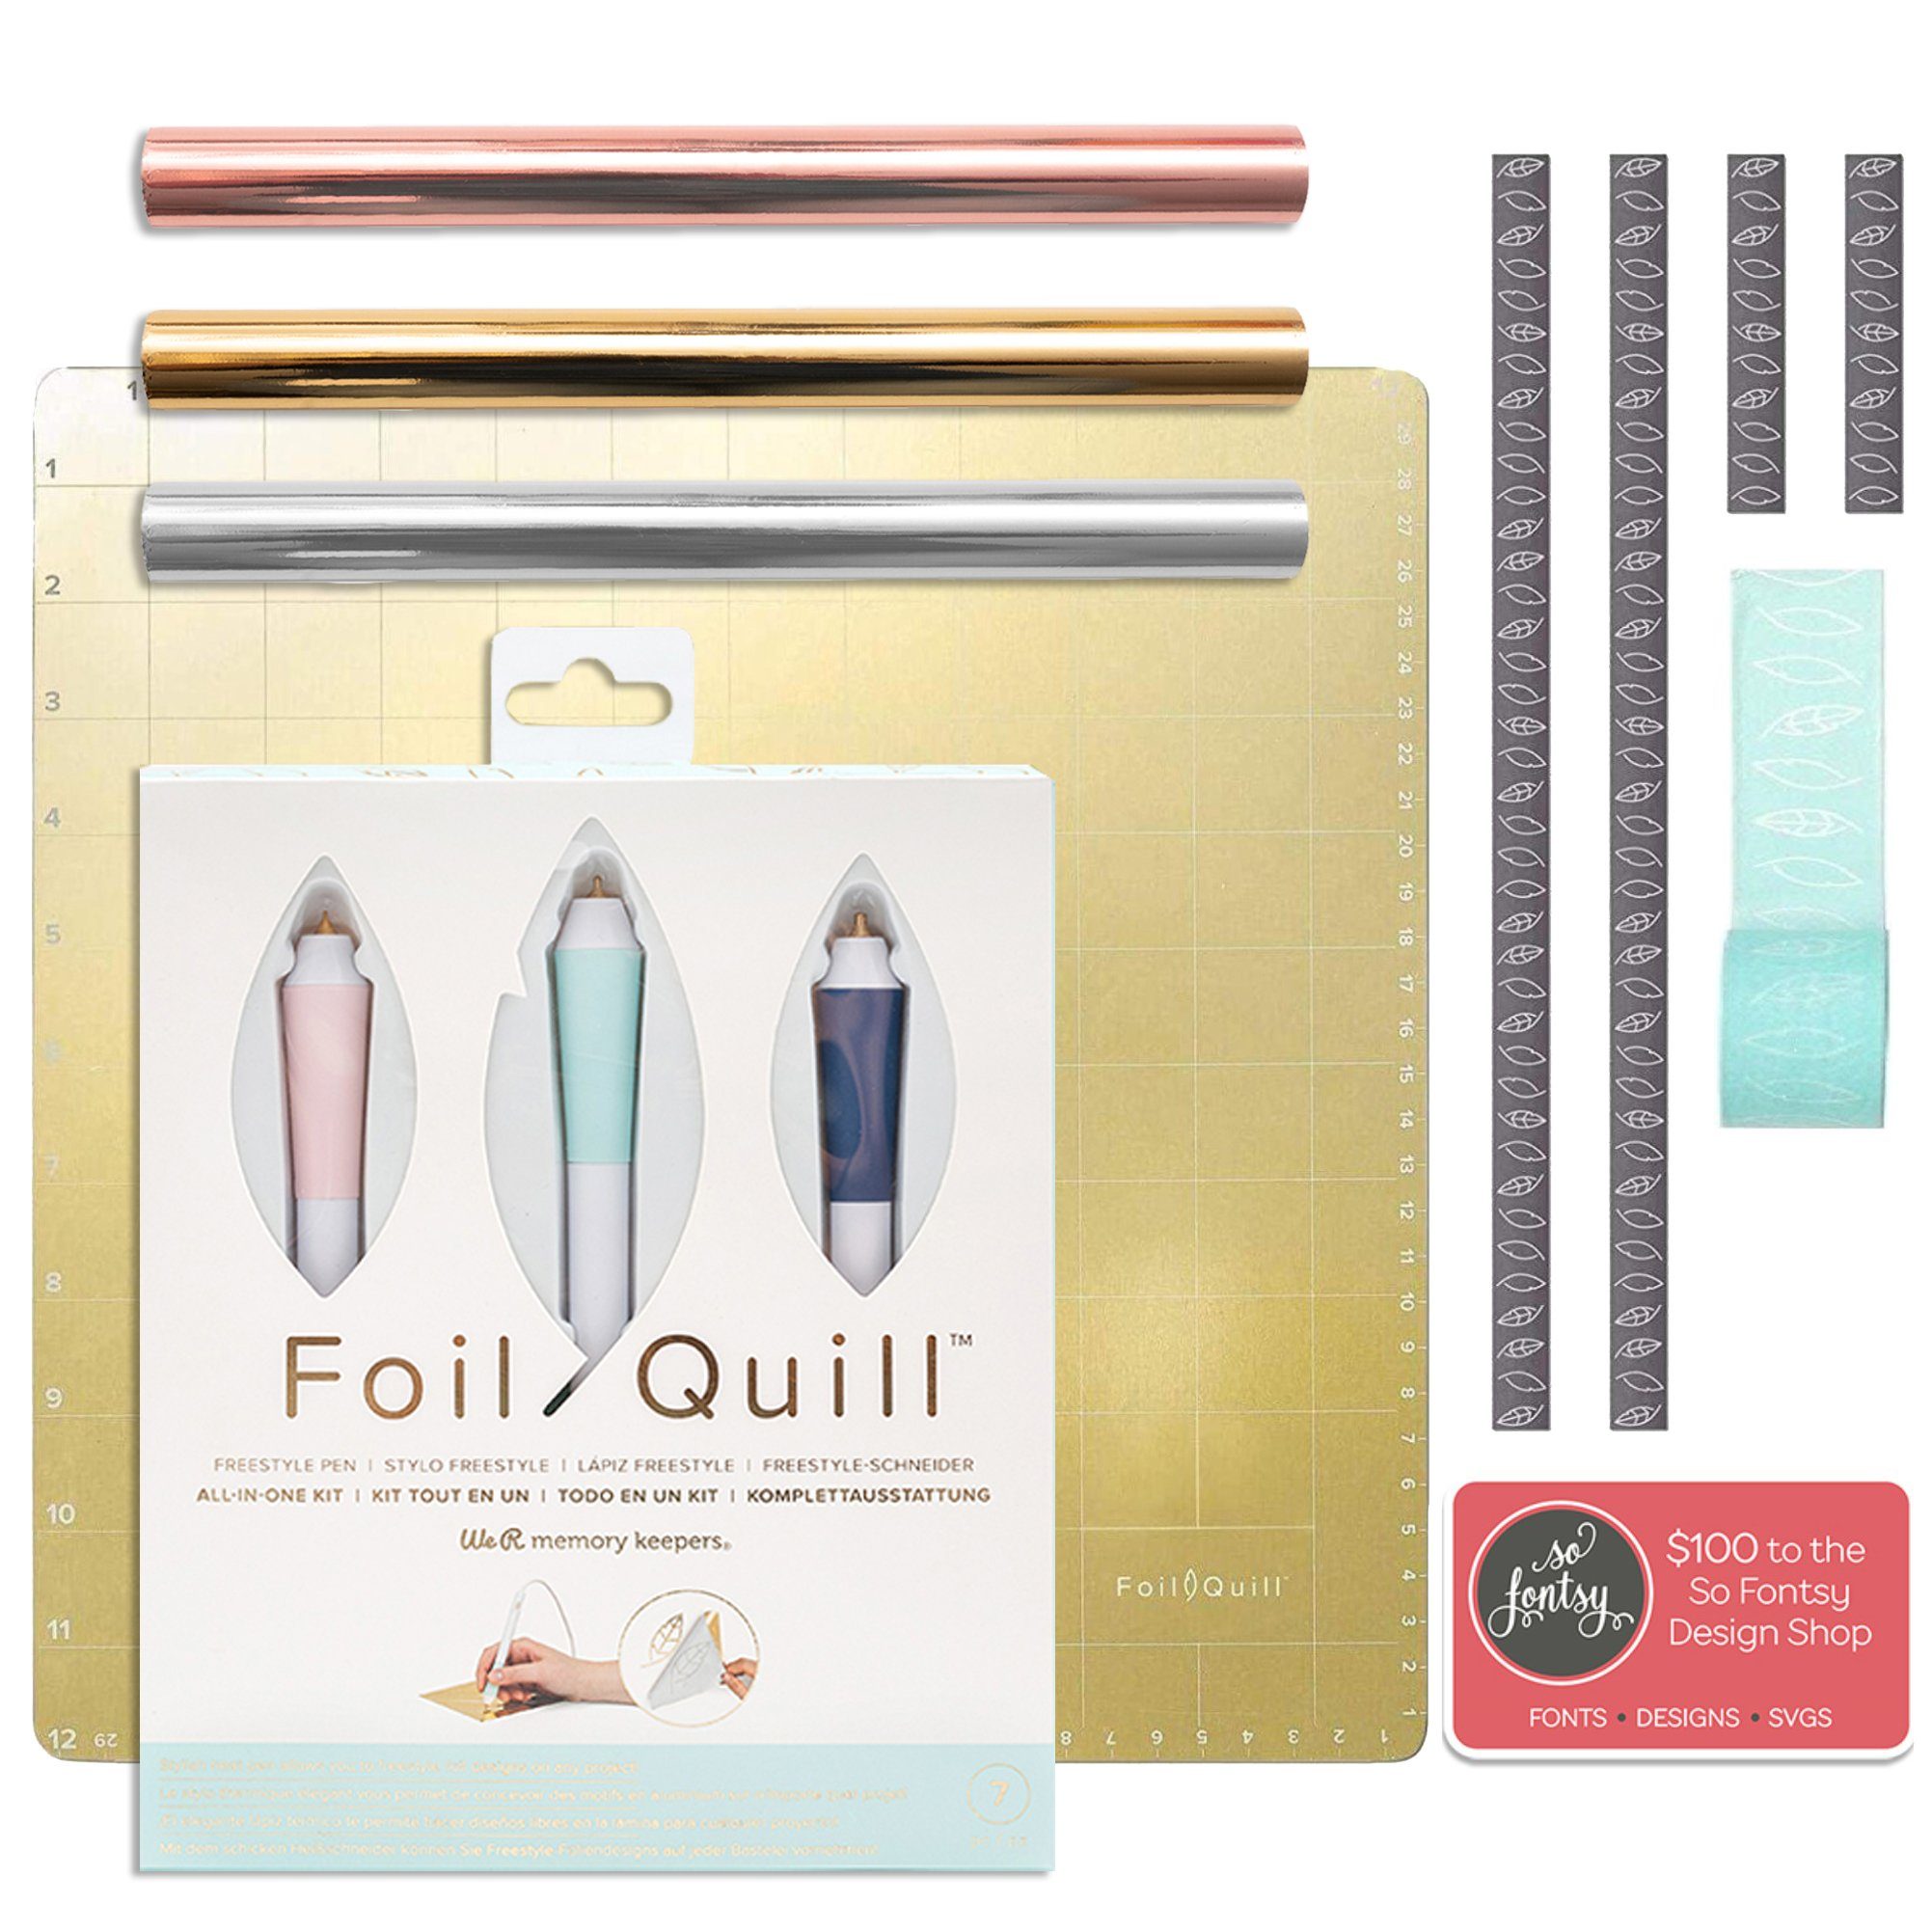 Foil Quill and Foil Quill Accessories & Bundles